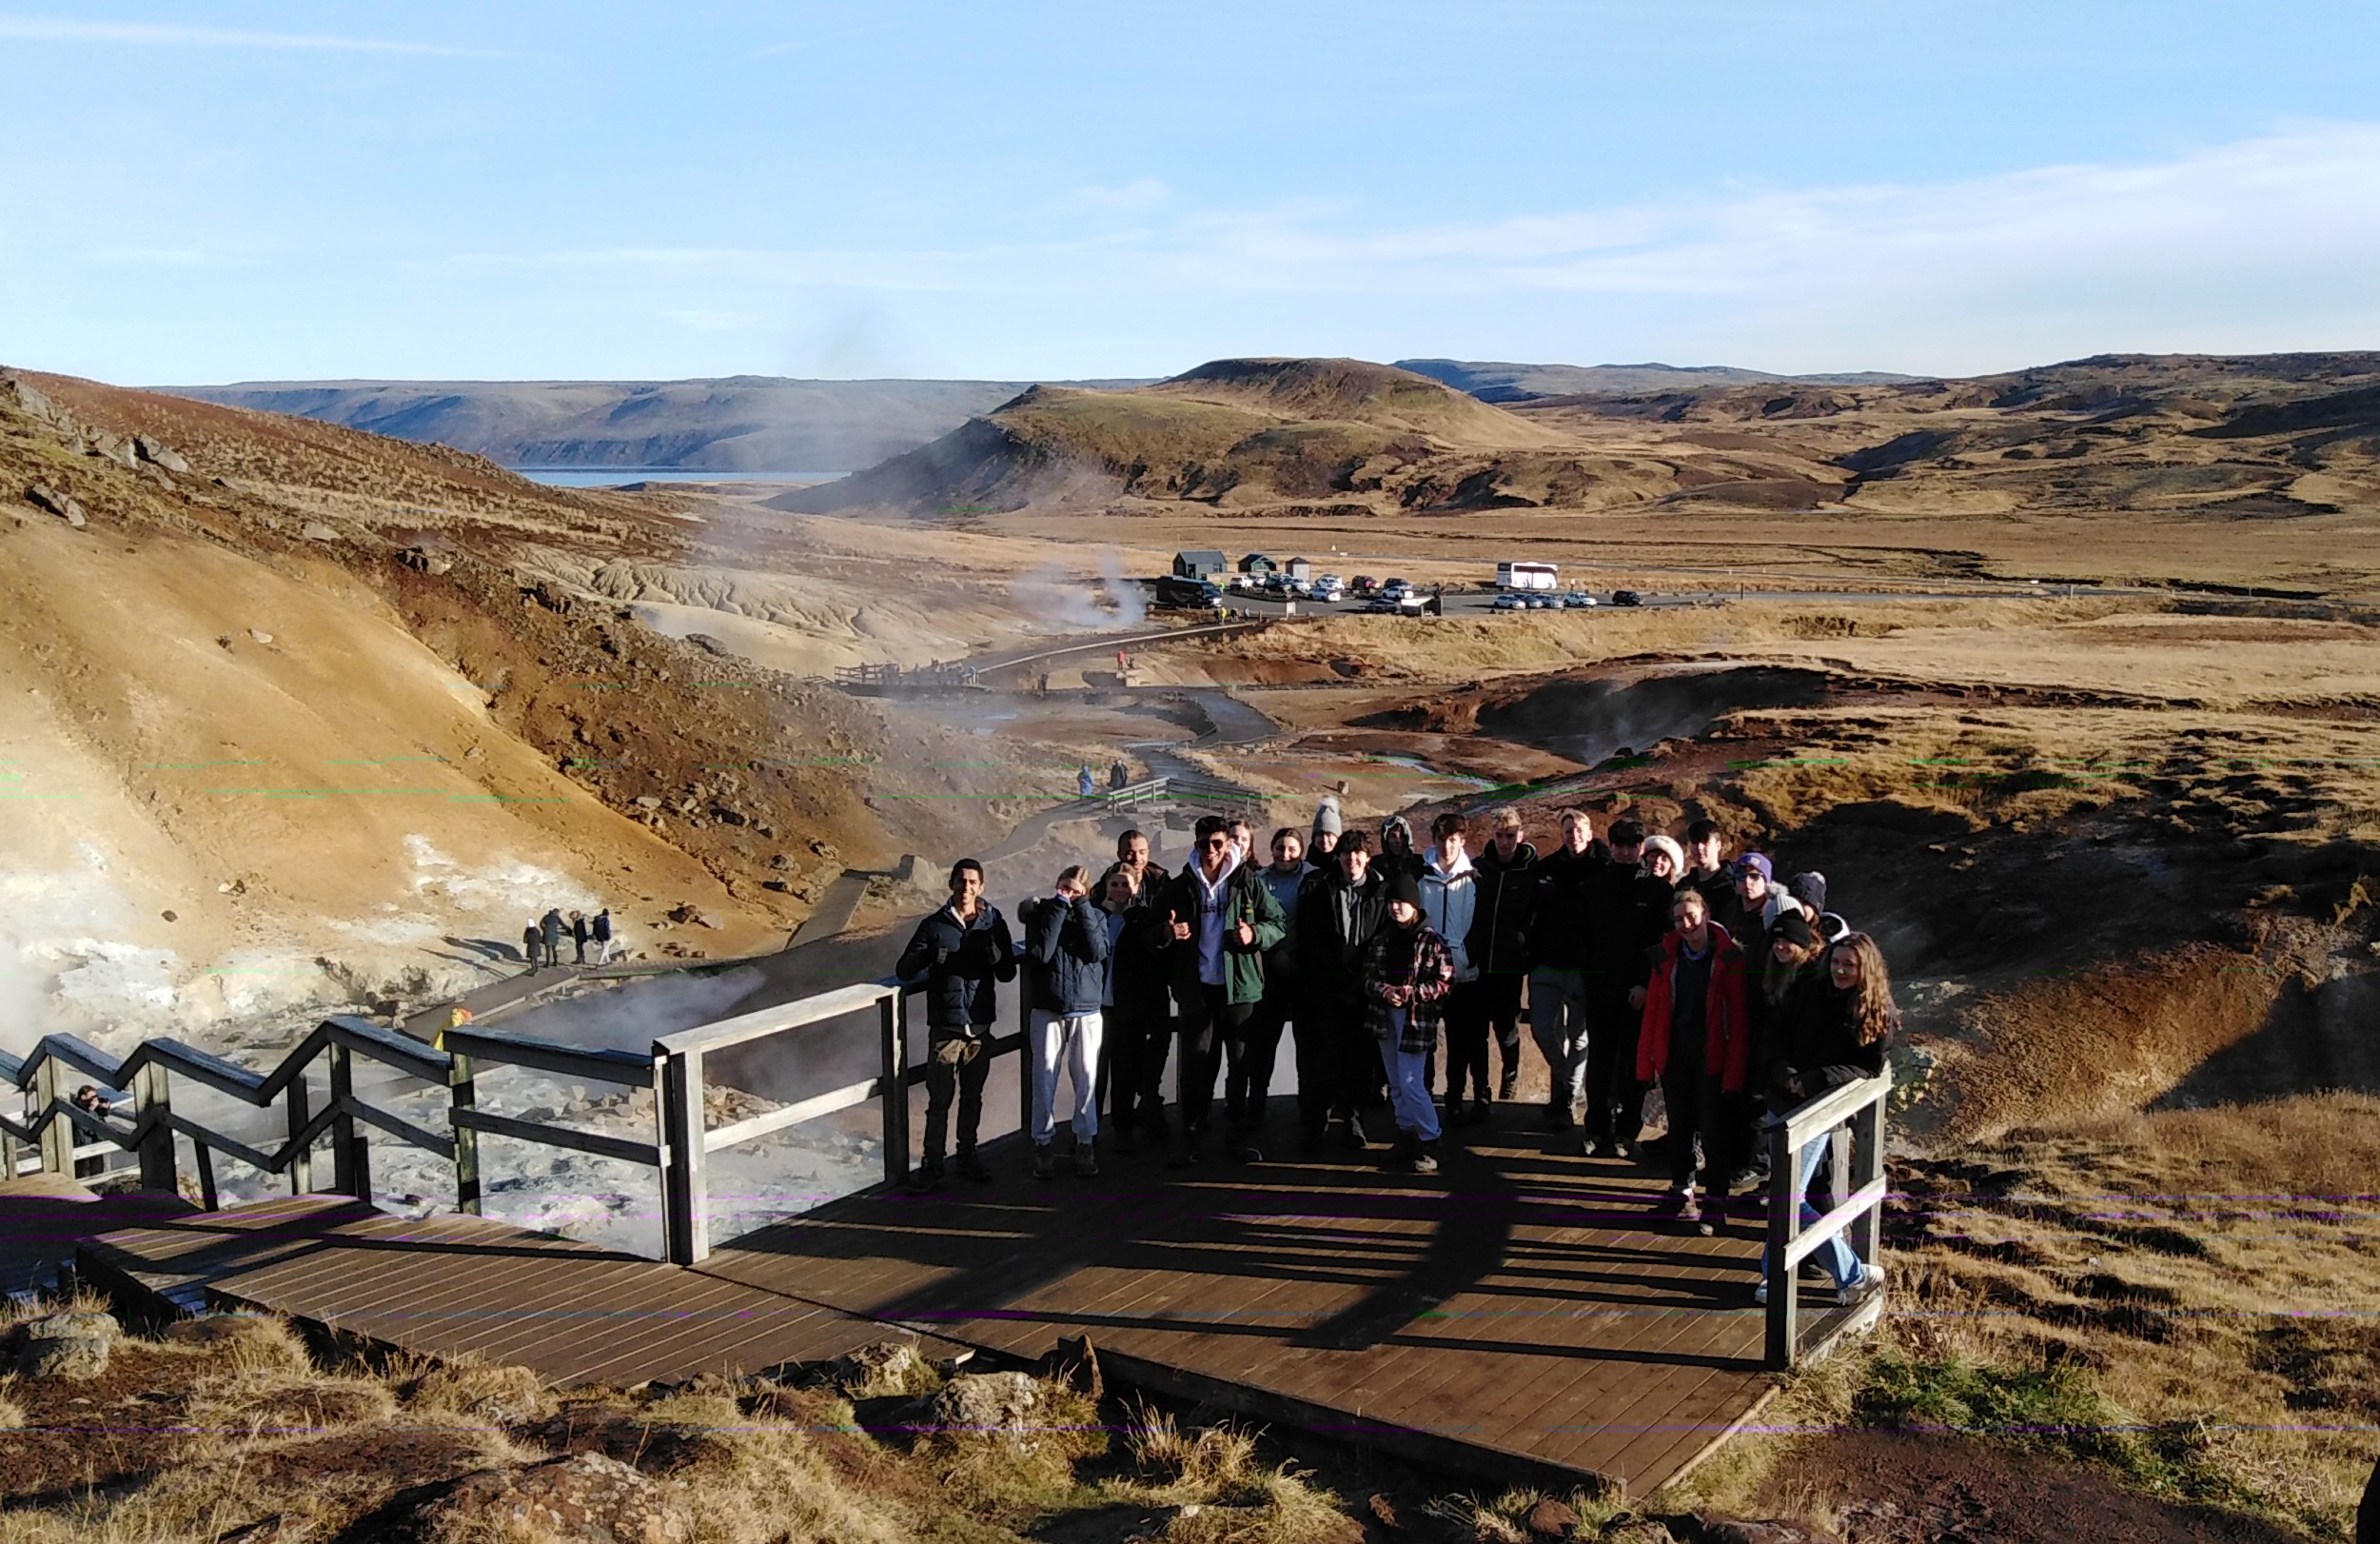 Students pose for a picture in front of stunning scenery during their Geography trip to Iceland